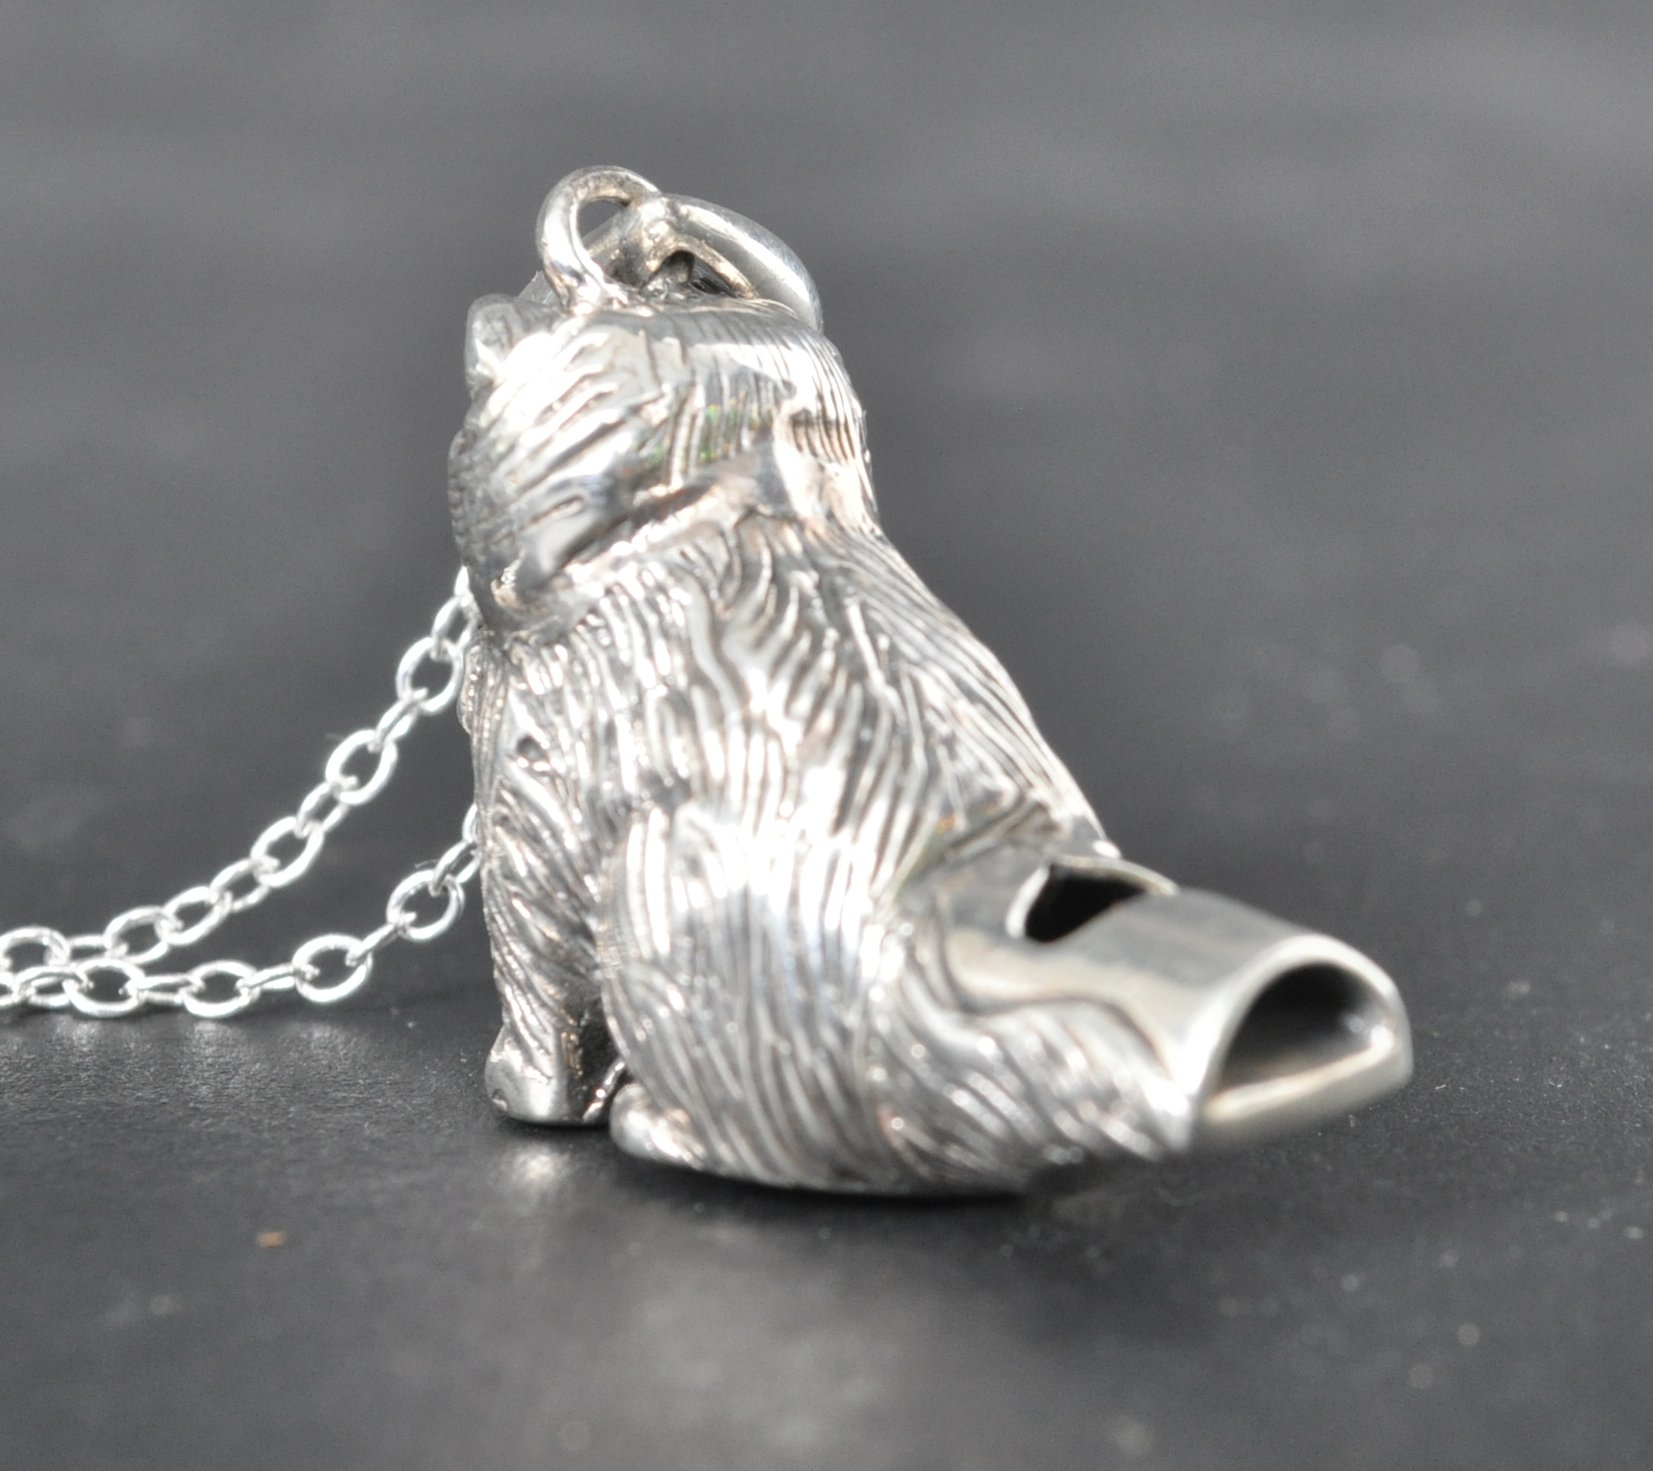 SILVER WHISTLE PENDANT IN THE FORM OF A CAT - Image 4 of 5